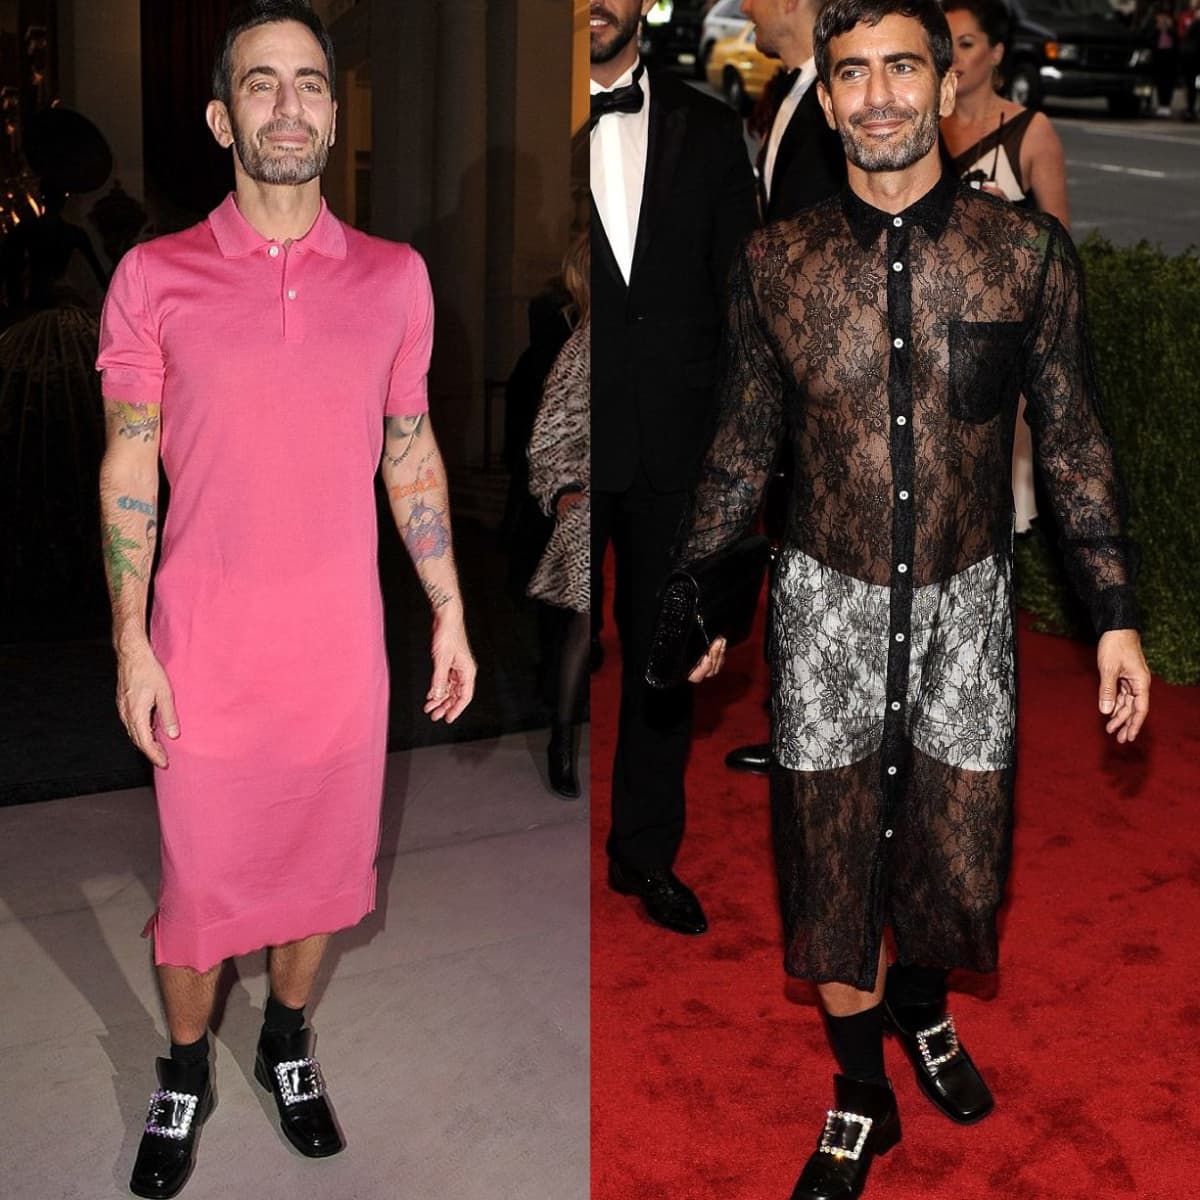 Marc Jacobs In A Pink Dress: Look Of The Day